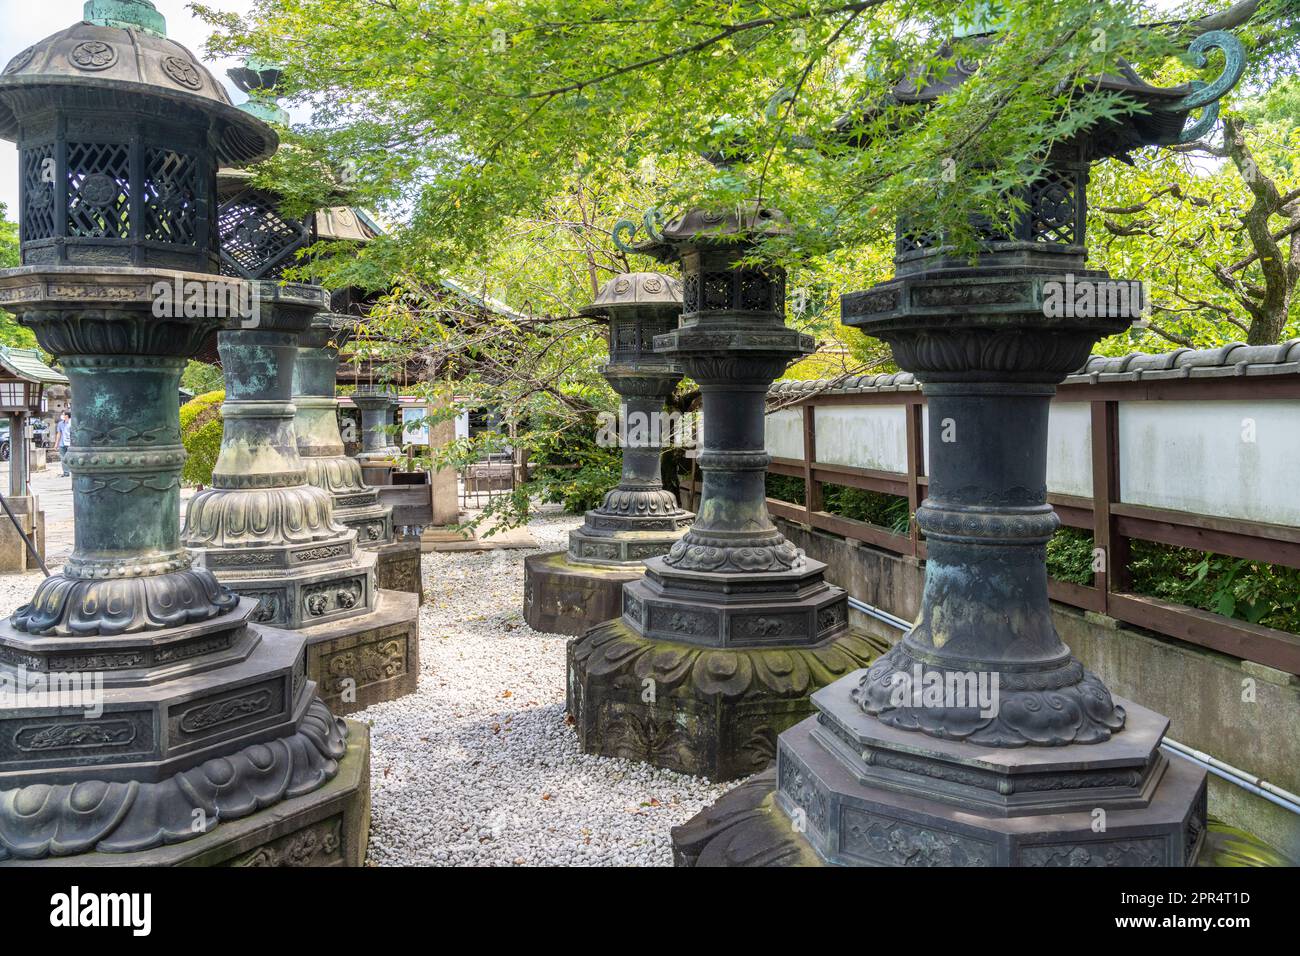 Japanese style stone and cooper lanterns leading to the Ueno Tosho-gu Shrine honden and Karamon in Ueno Park, Tokyo, Japan. The shrine was constructed in 1627 as a mausoleum to the Tokugawa shoguns. Stock Photo